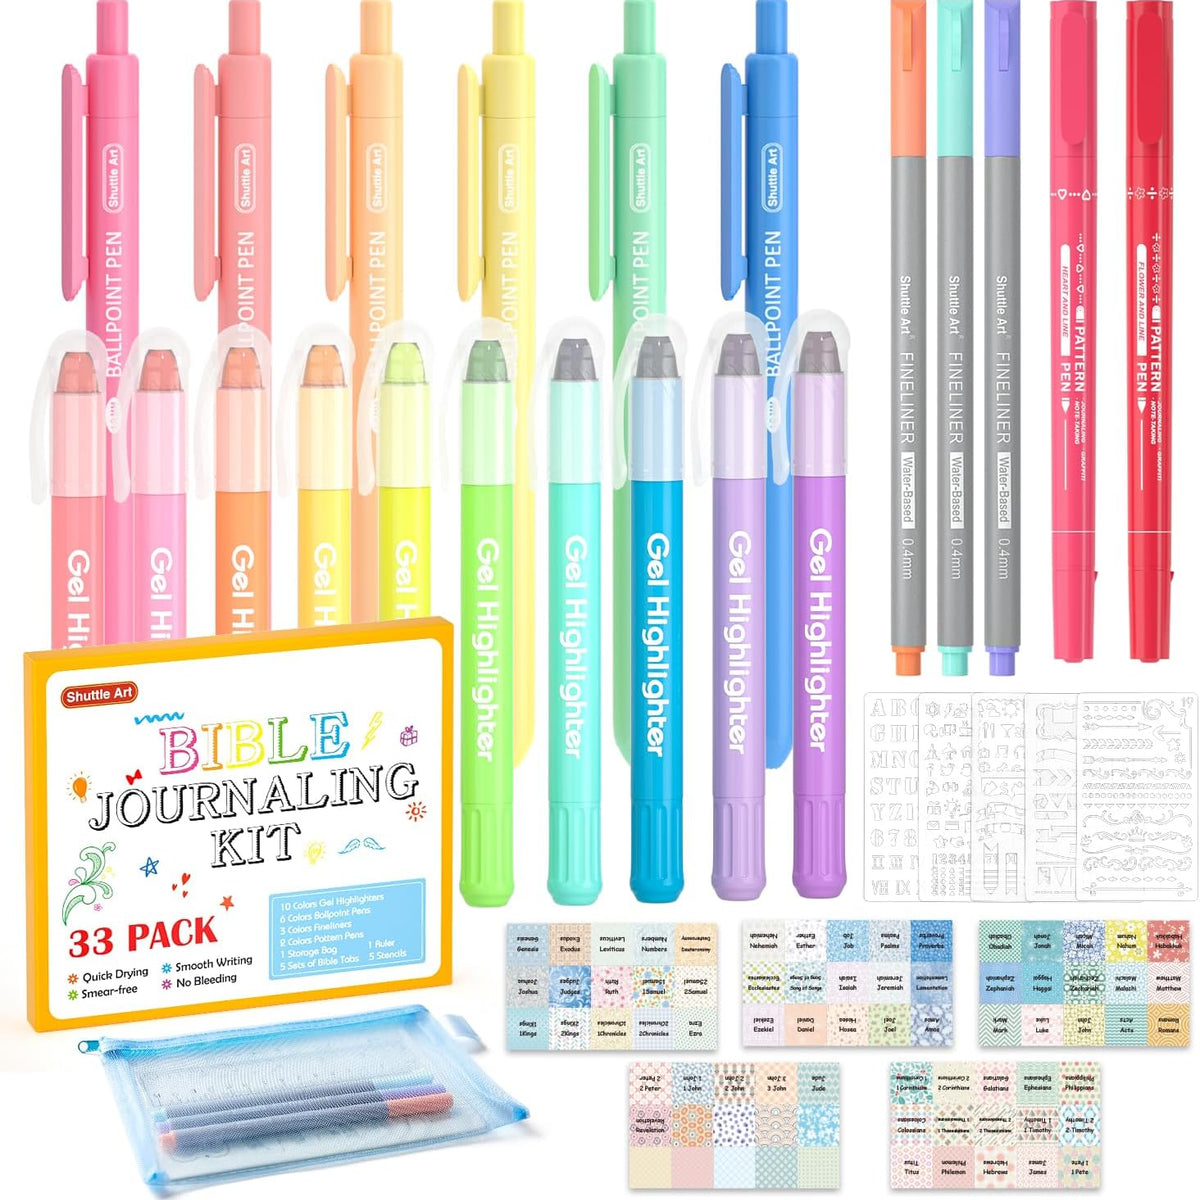 13 Best Pens & Markers For Bible Journaling  Bible journaling supplies,  Bible journaling, Bible art journaling